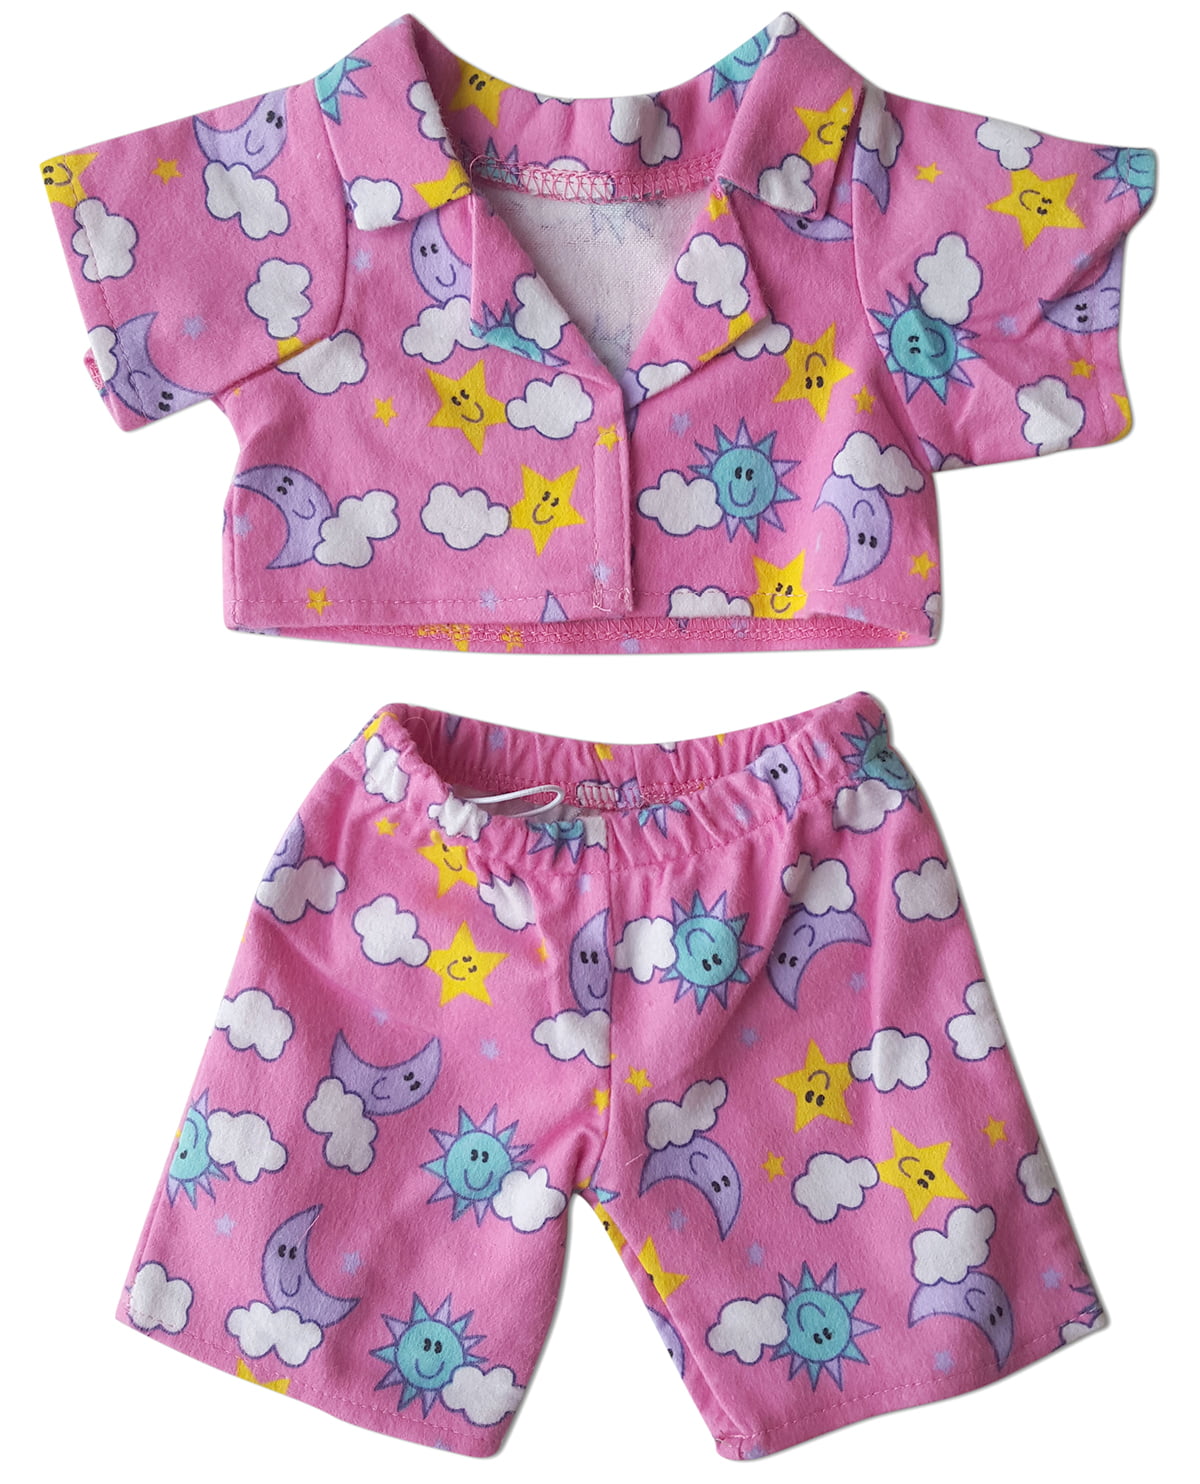 18" Build-a-bear and M Pink Cloud Pj's Outfit Teddy Bear Clothes Fits Most 14" 